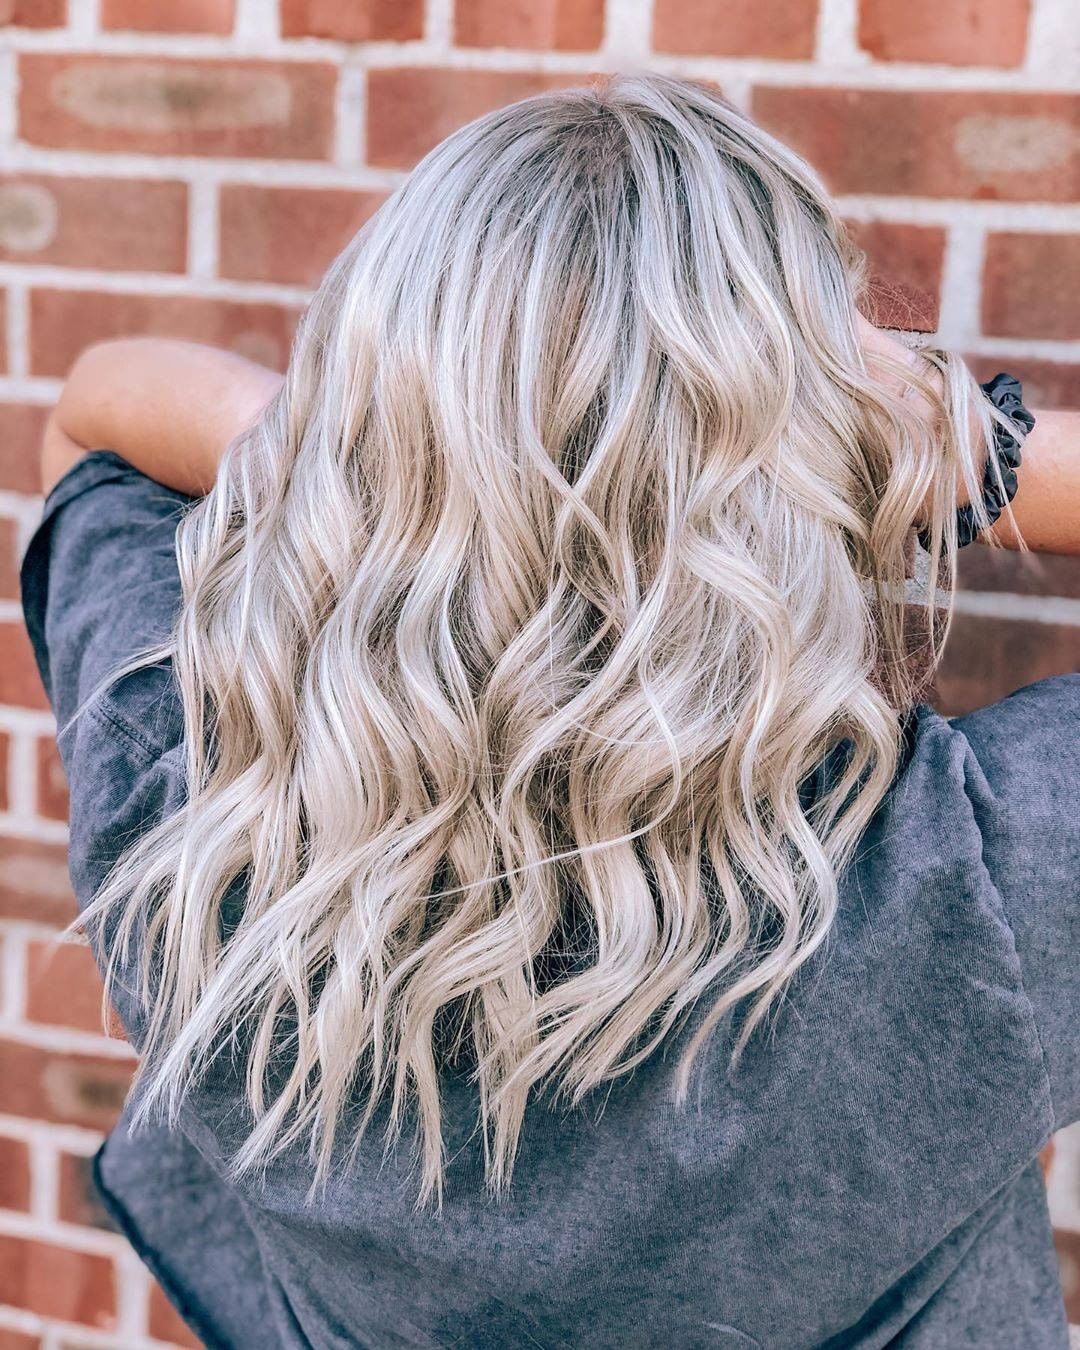 Redken - Bravo @hair_jordan26 🇺🇸 for creating this beautiful high-level blonde with our Shades EQ Gloss Level 10s. 👏 
 
In order to get a high lift without compromising the integrity of her client's h...